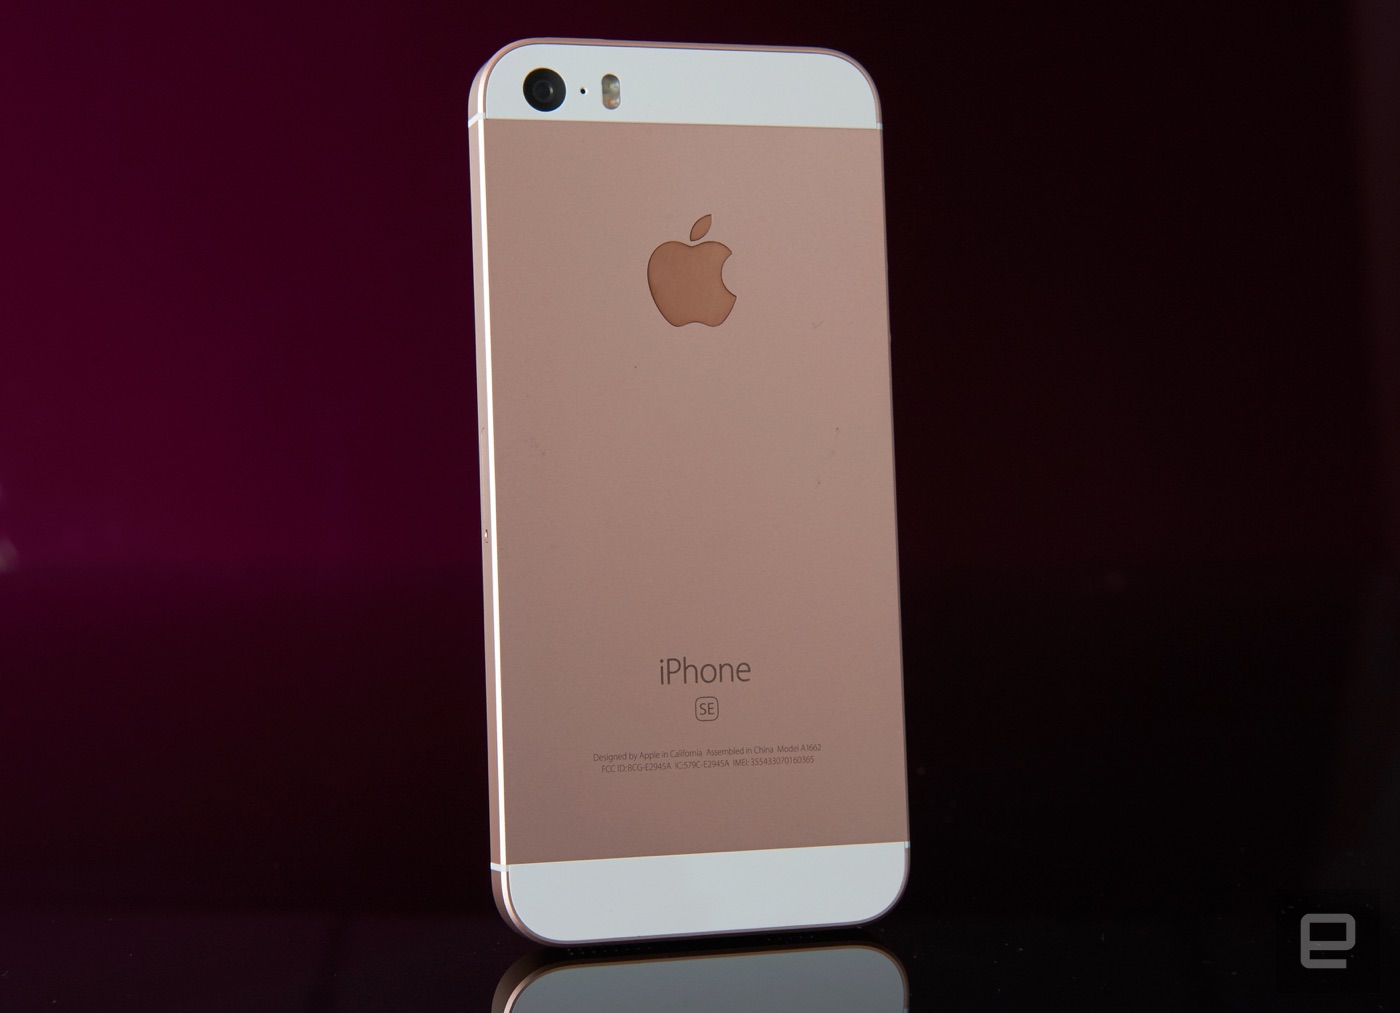 Apple iPhone SE review: A compelling blend of old and